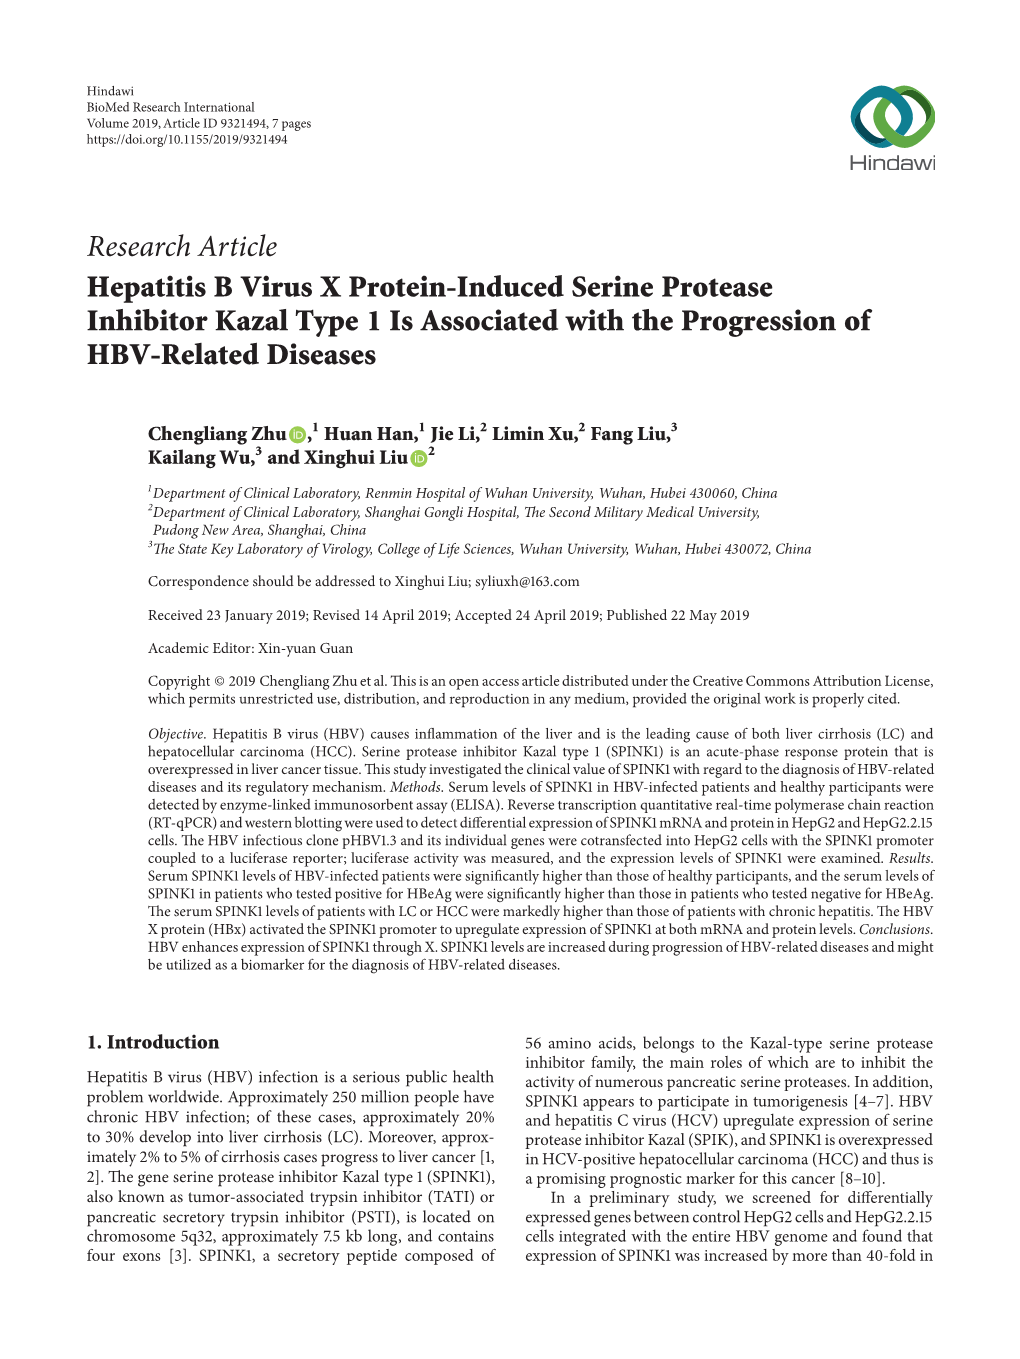 Research Article Hepatitis B Virus X Protein-Induced Serine Protease Inhibitor Kazal Type 1 Is Associated with the Progression of HBV-Related Diseases